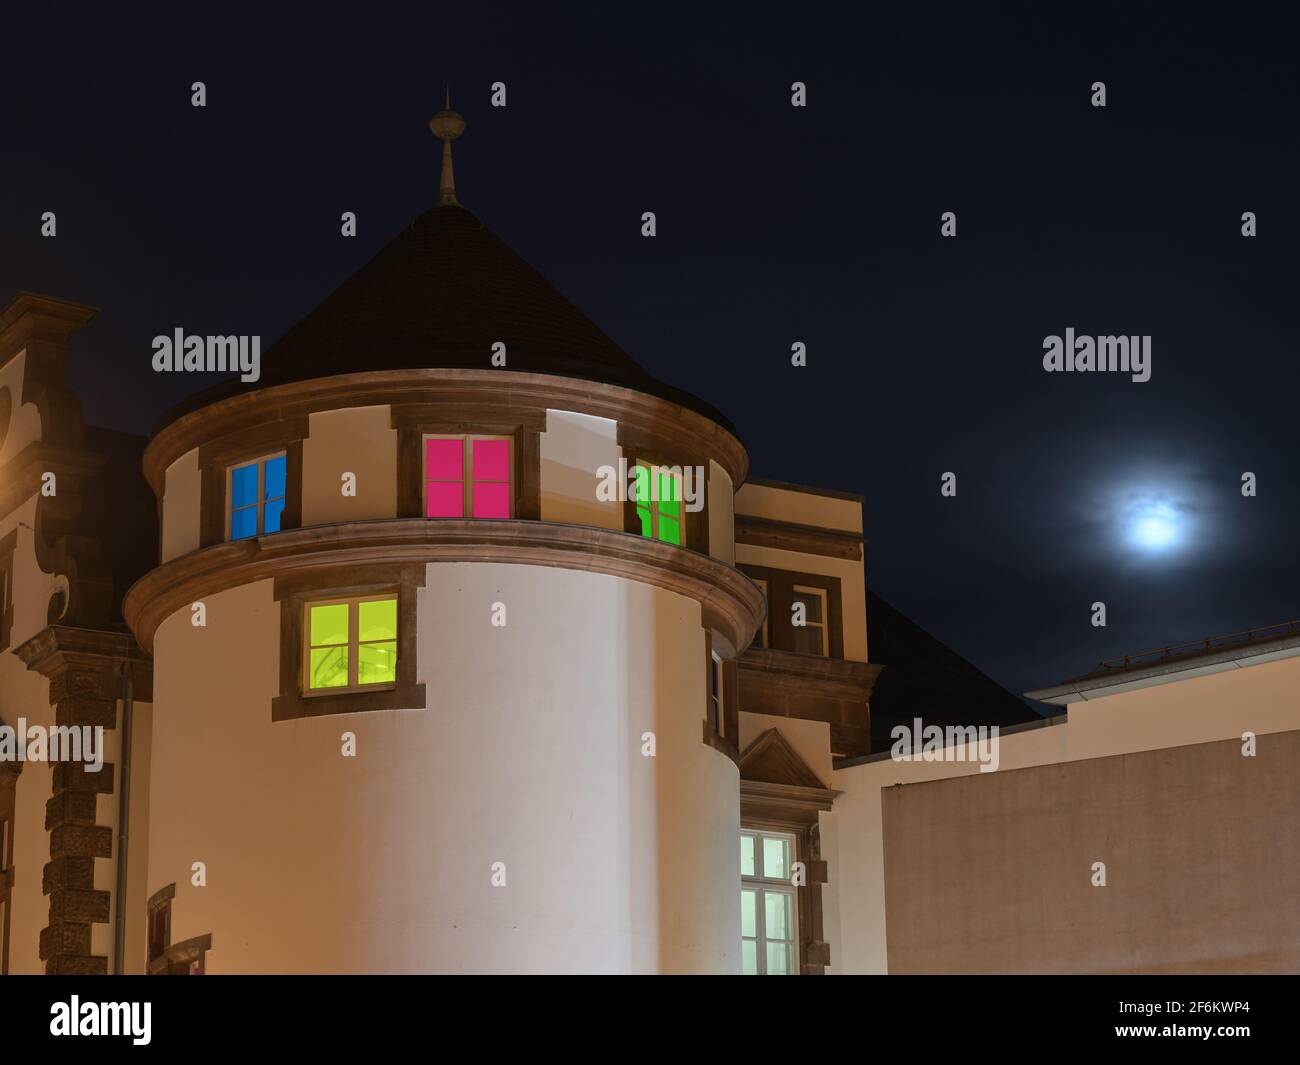 Colored windows at full moon; Farbige Fenster bei Vollmond Stock Photo